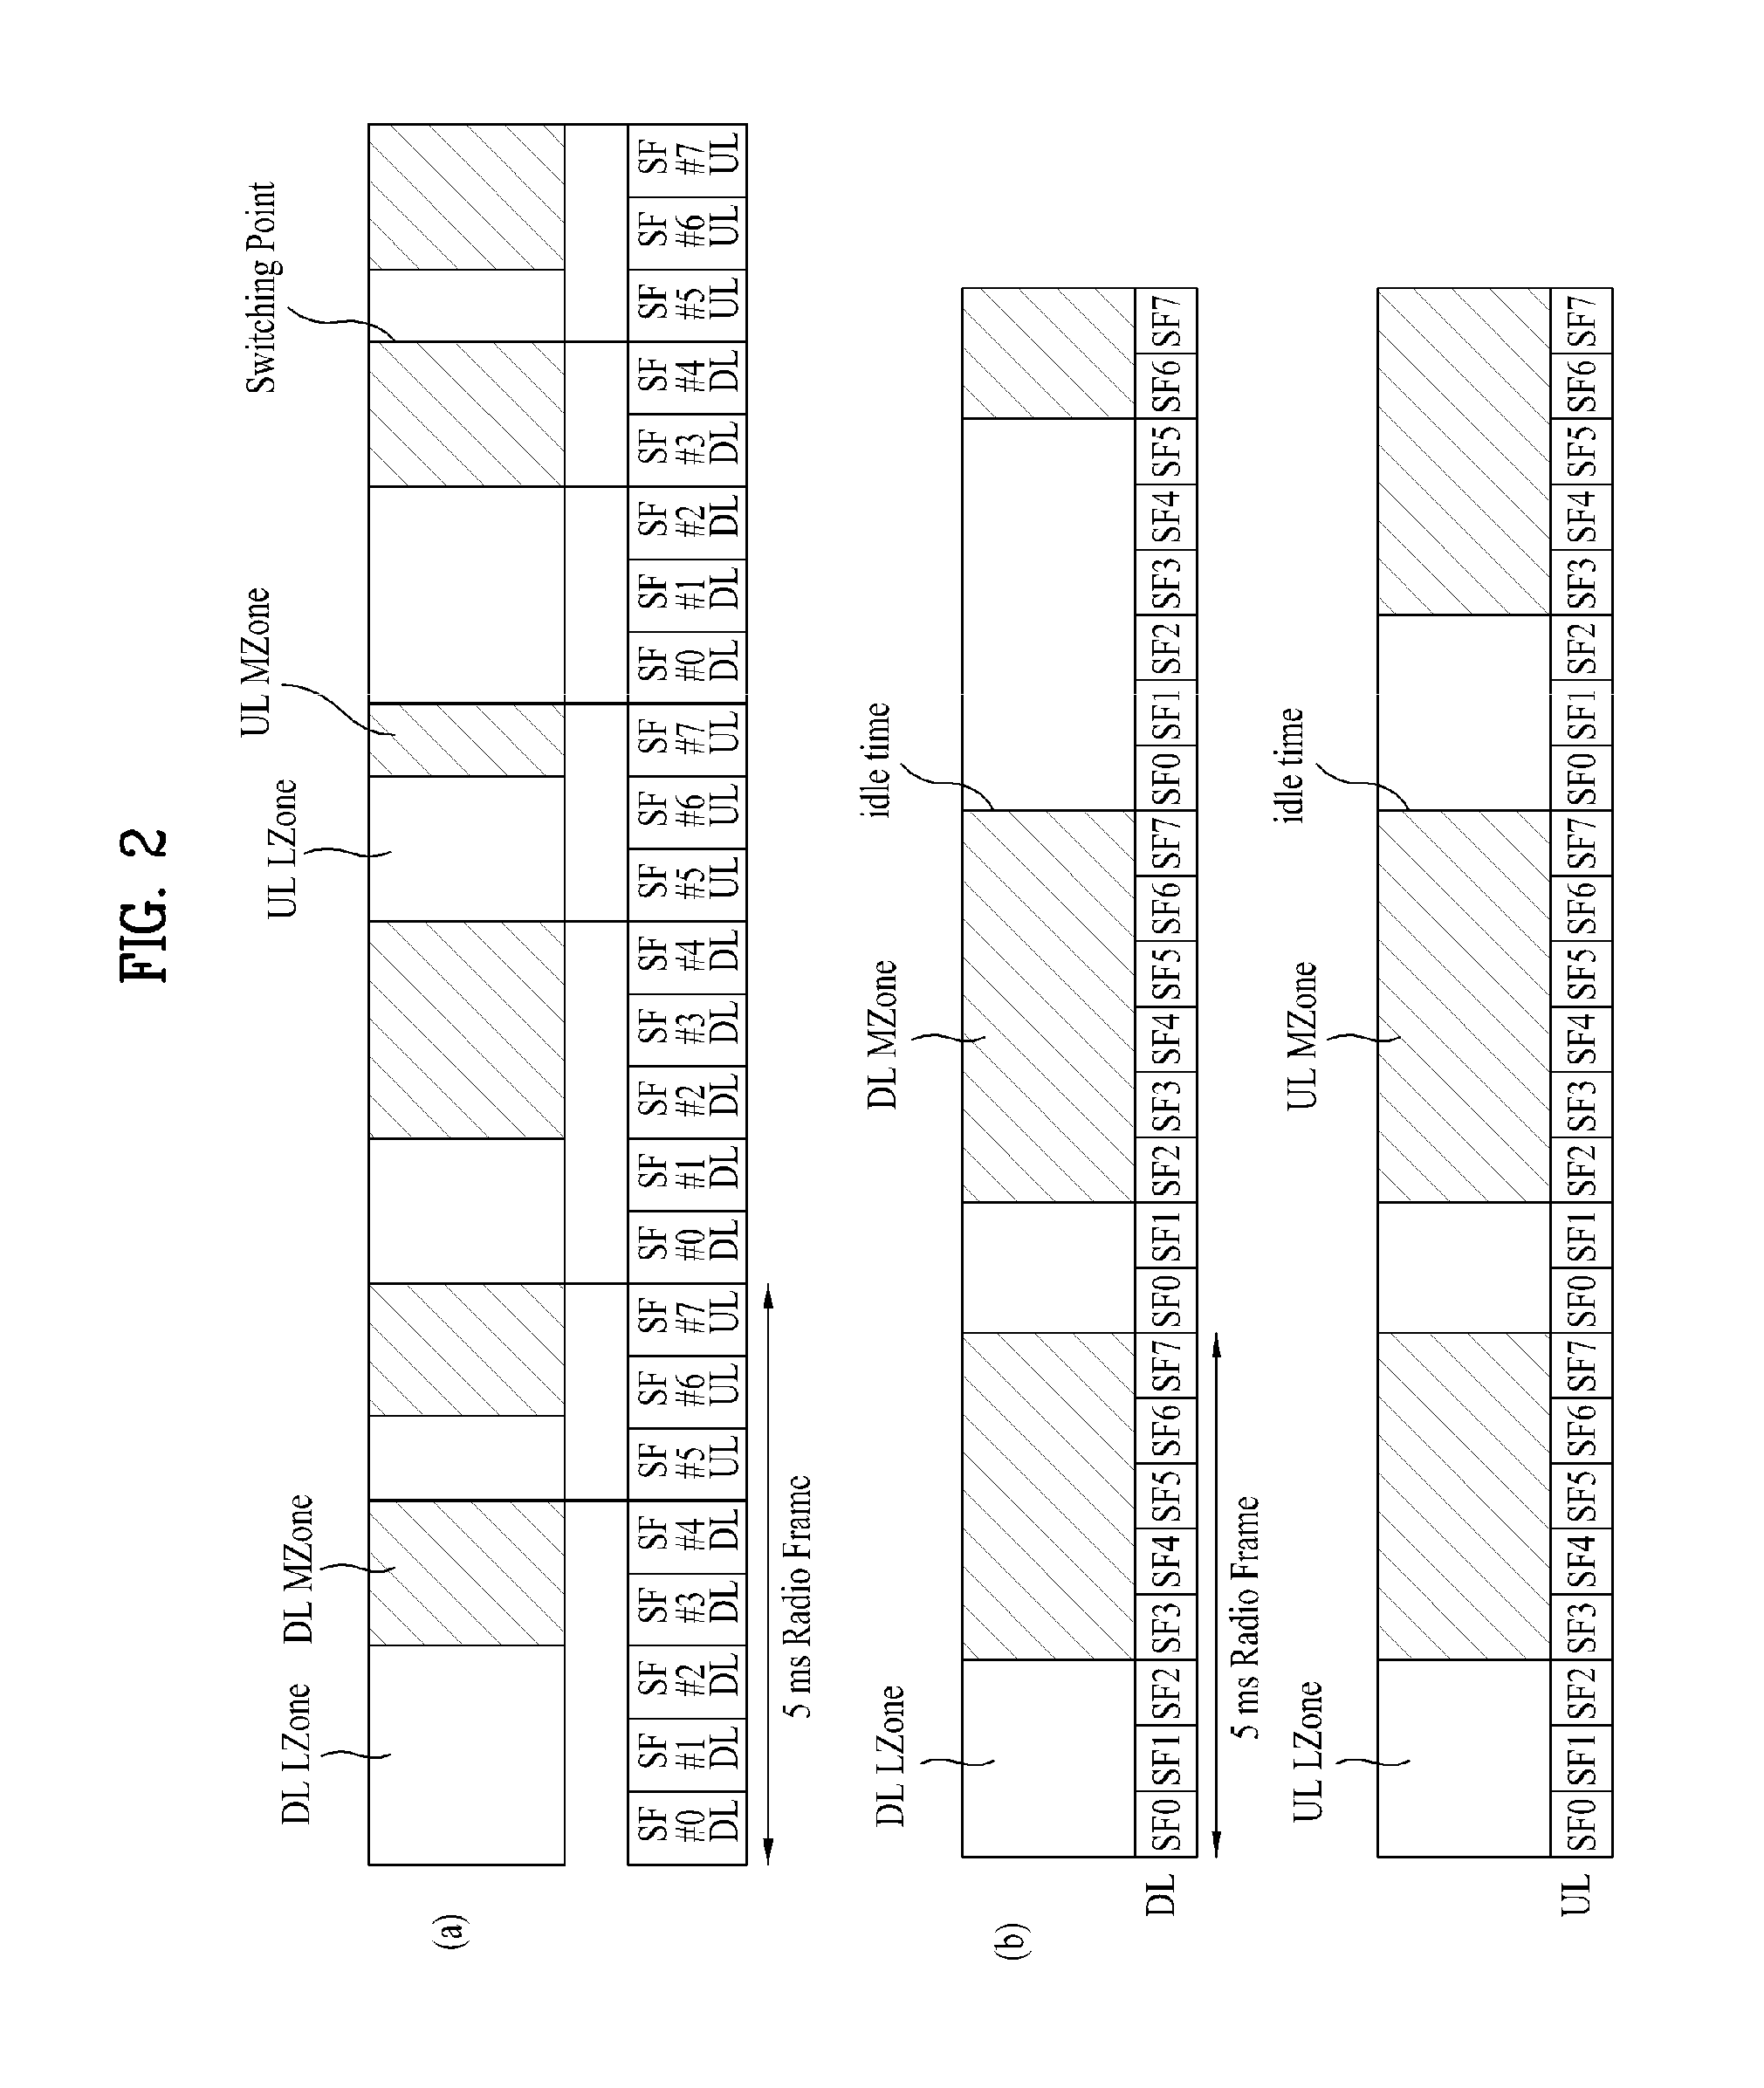 Method for performing handover in a mobile communication system